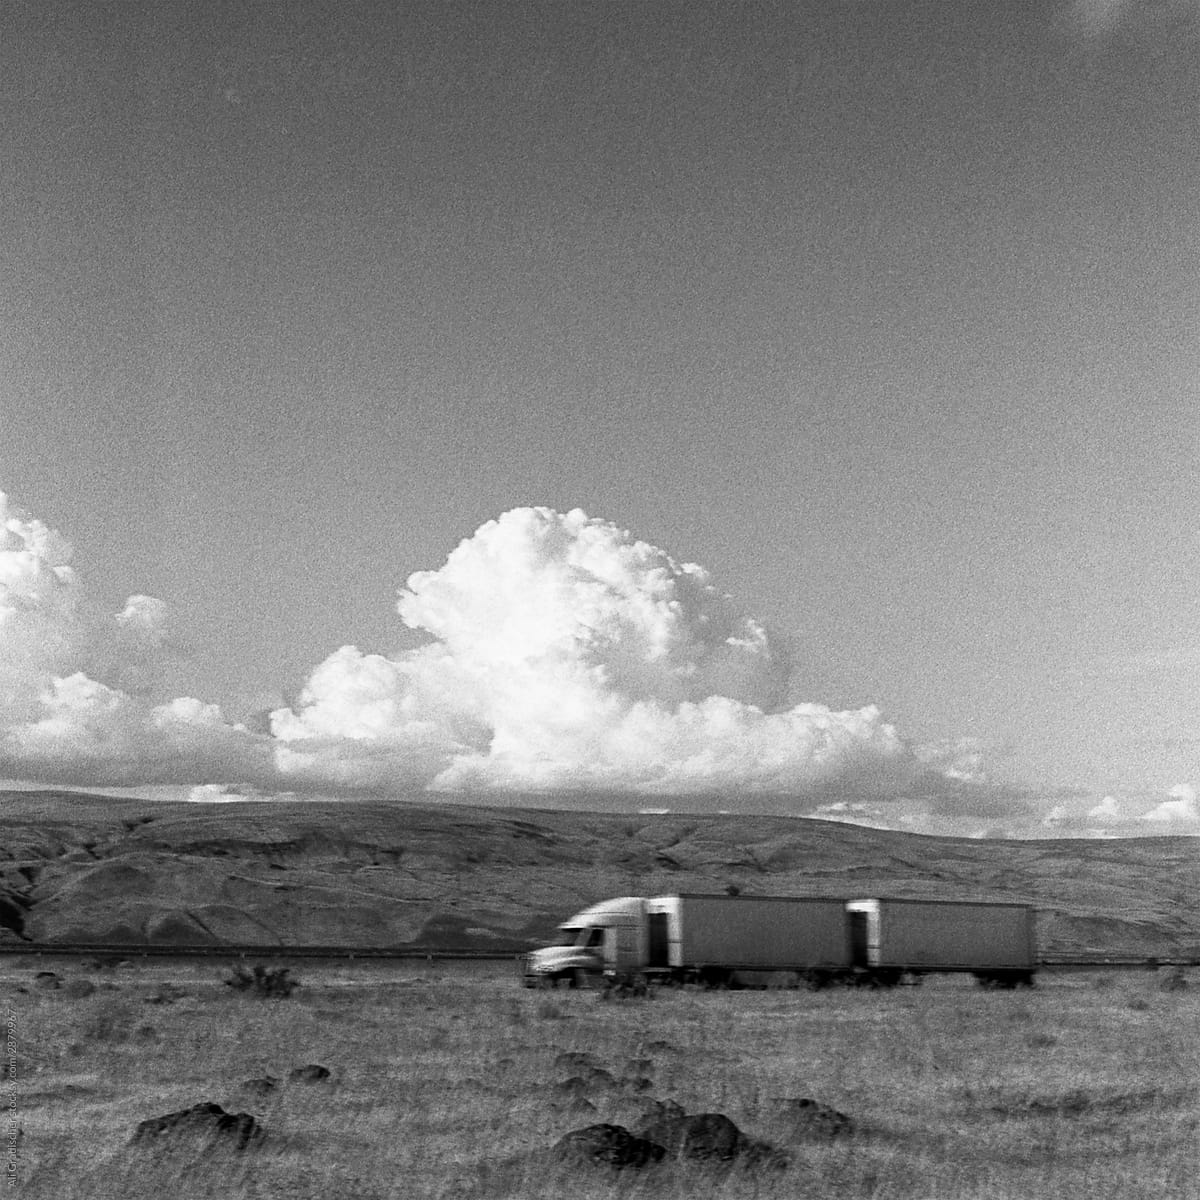 "On The Road In Central Oregon" by Stocksy Contributor "Ali Gradischer